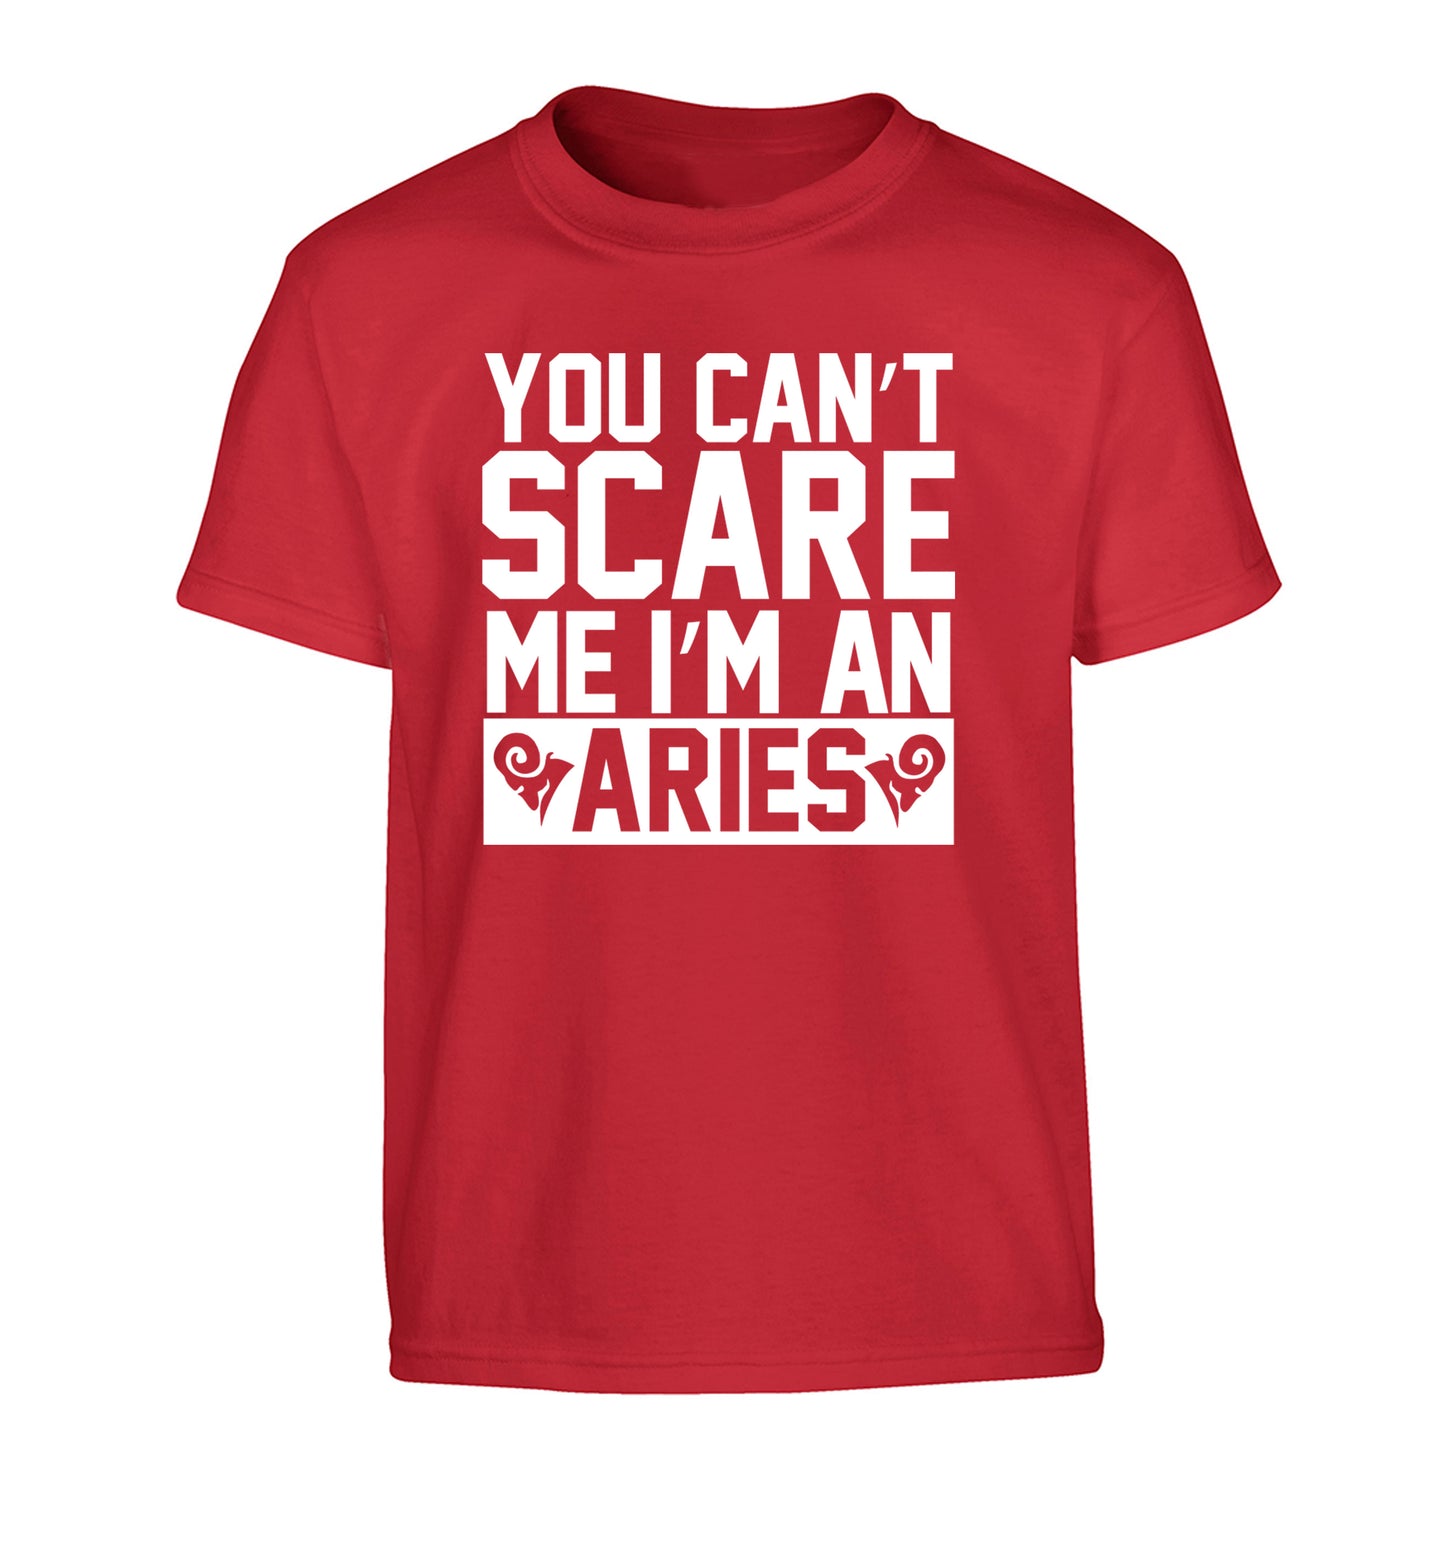 You can't scare me I'm an aries Children's red Tshirt 12-13 Years